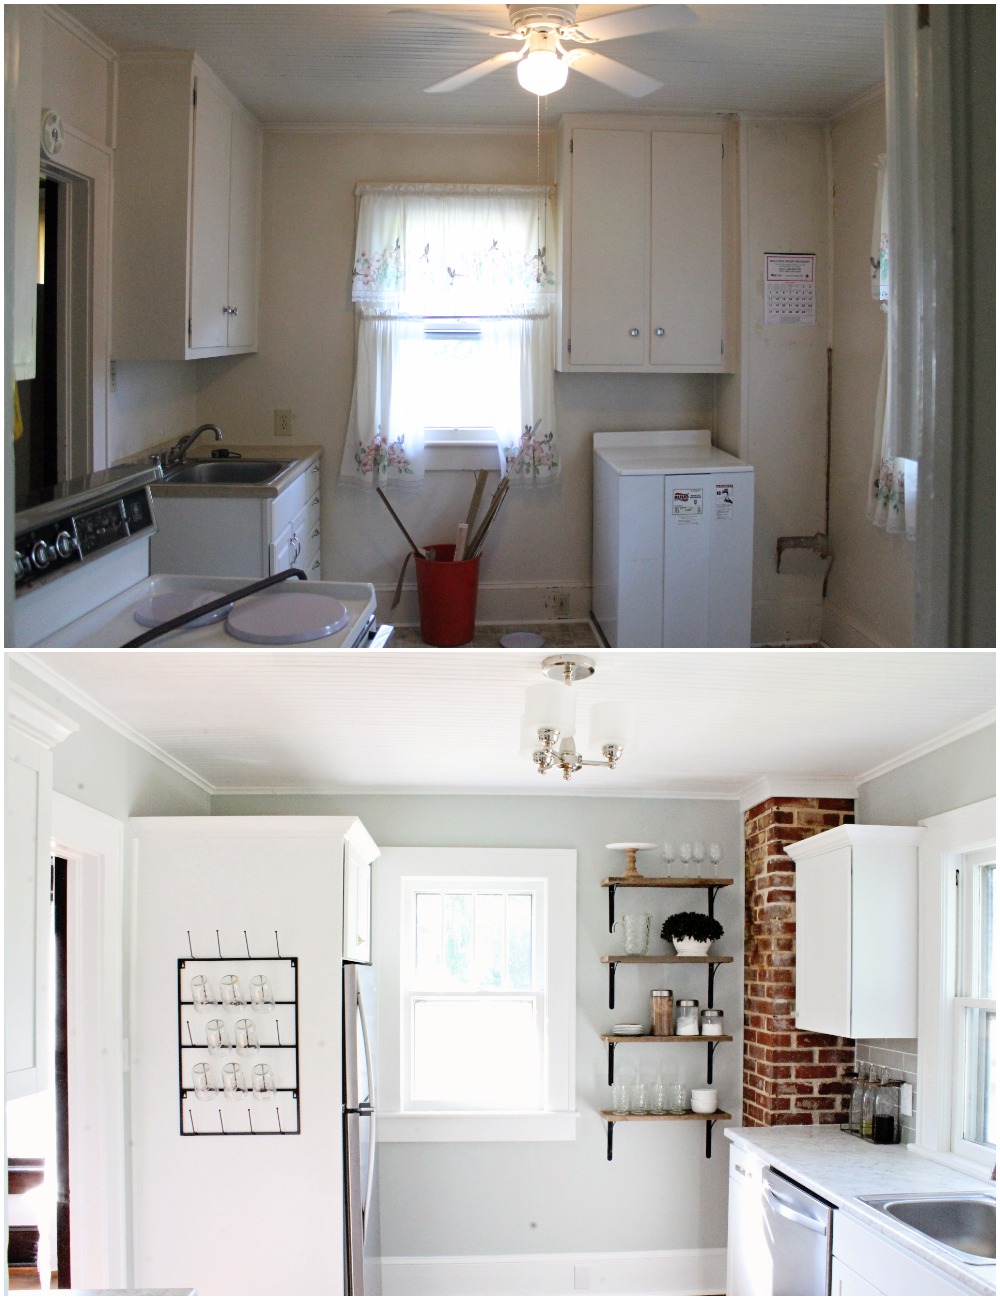 House Flipping Before and Afters - DIY BUDGET KITCHEN IDEAS WHITE SHAKER CABINETS (3).jpg